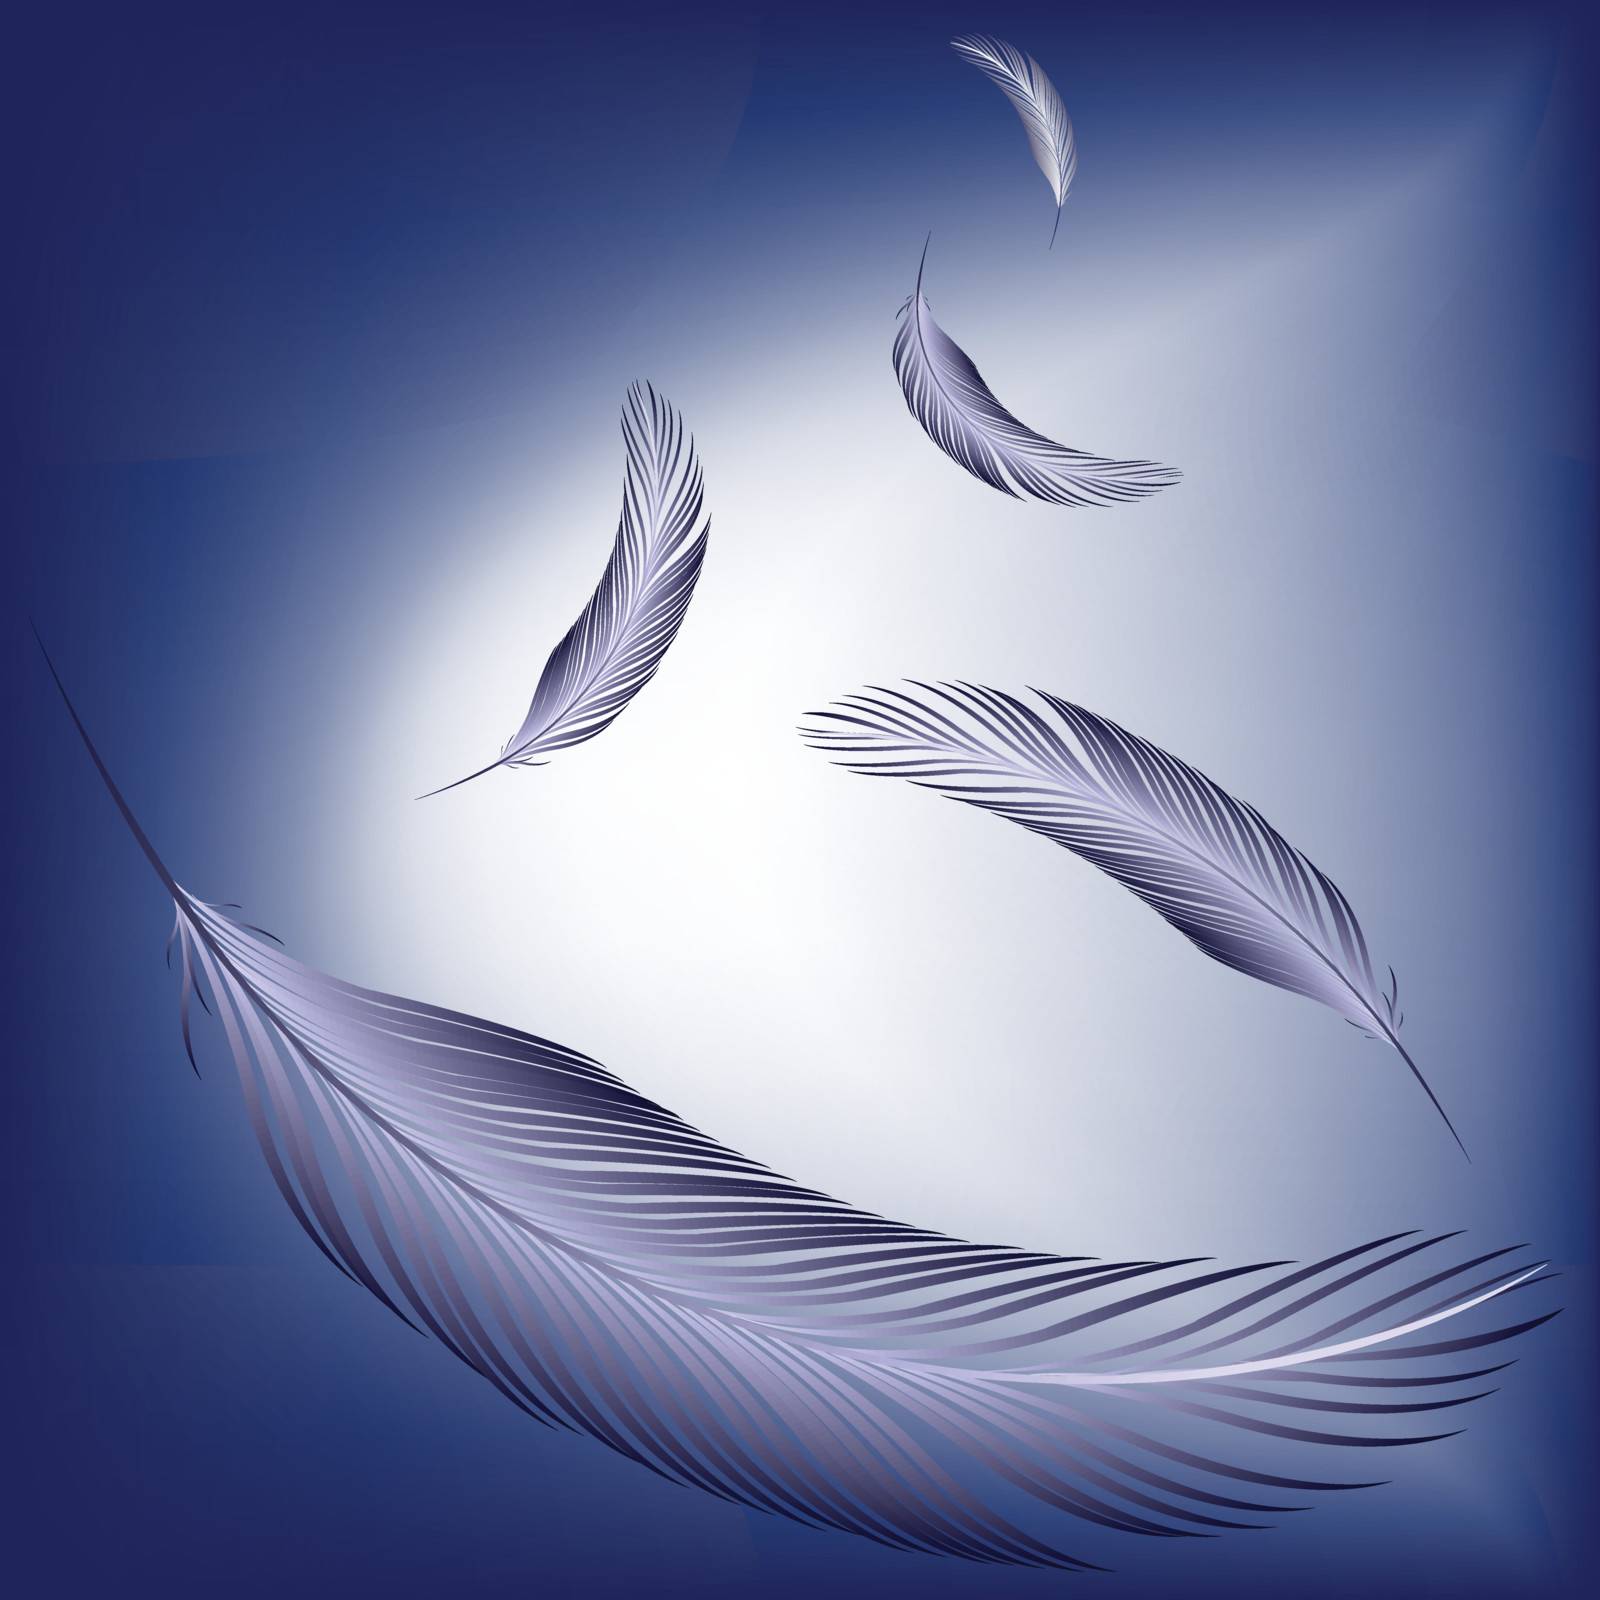 feathers in the wind, abstract vector art illustration